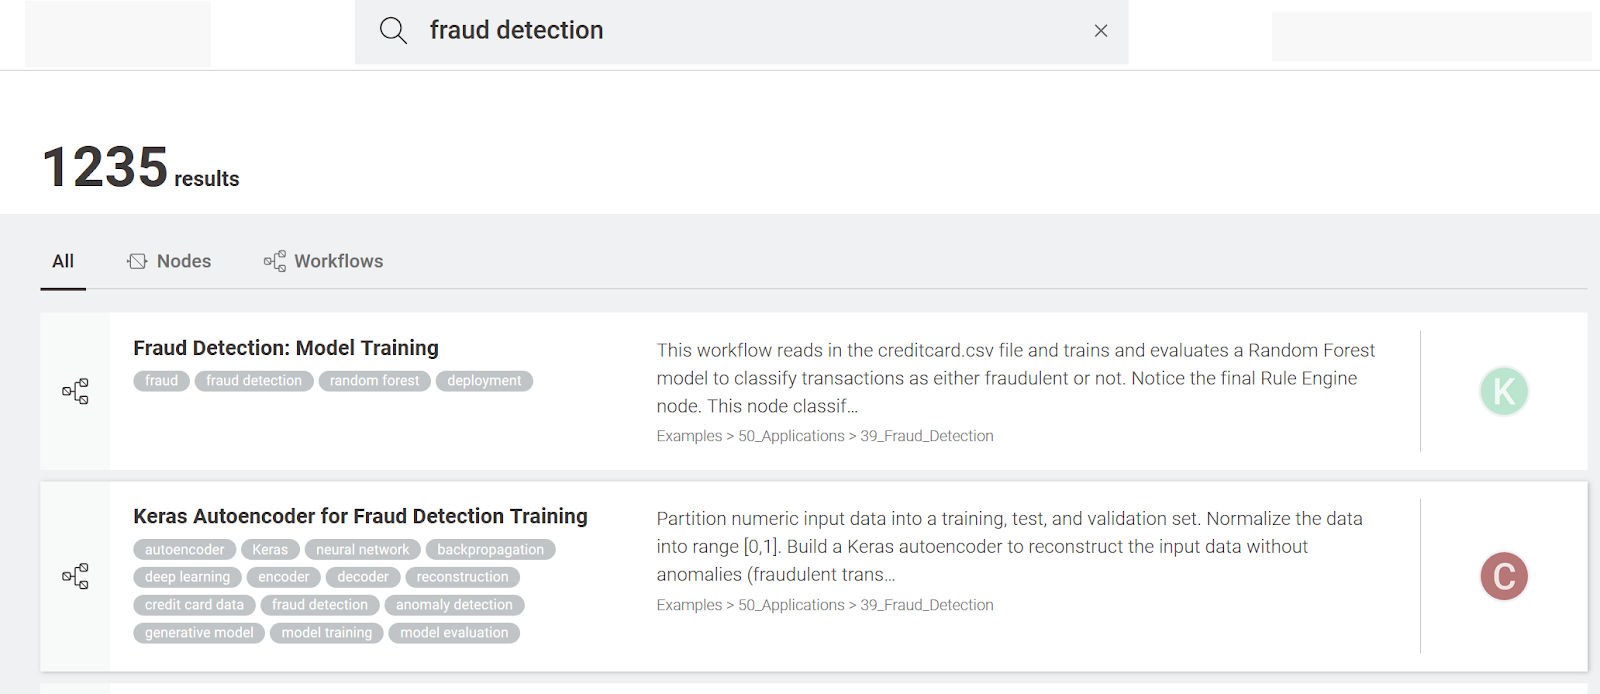 Figure 5. Top two results on the Workflow Hub after a search for “fraud detection”